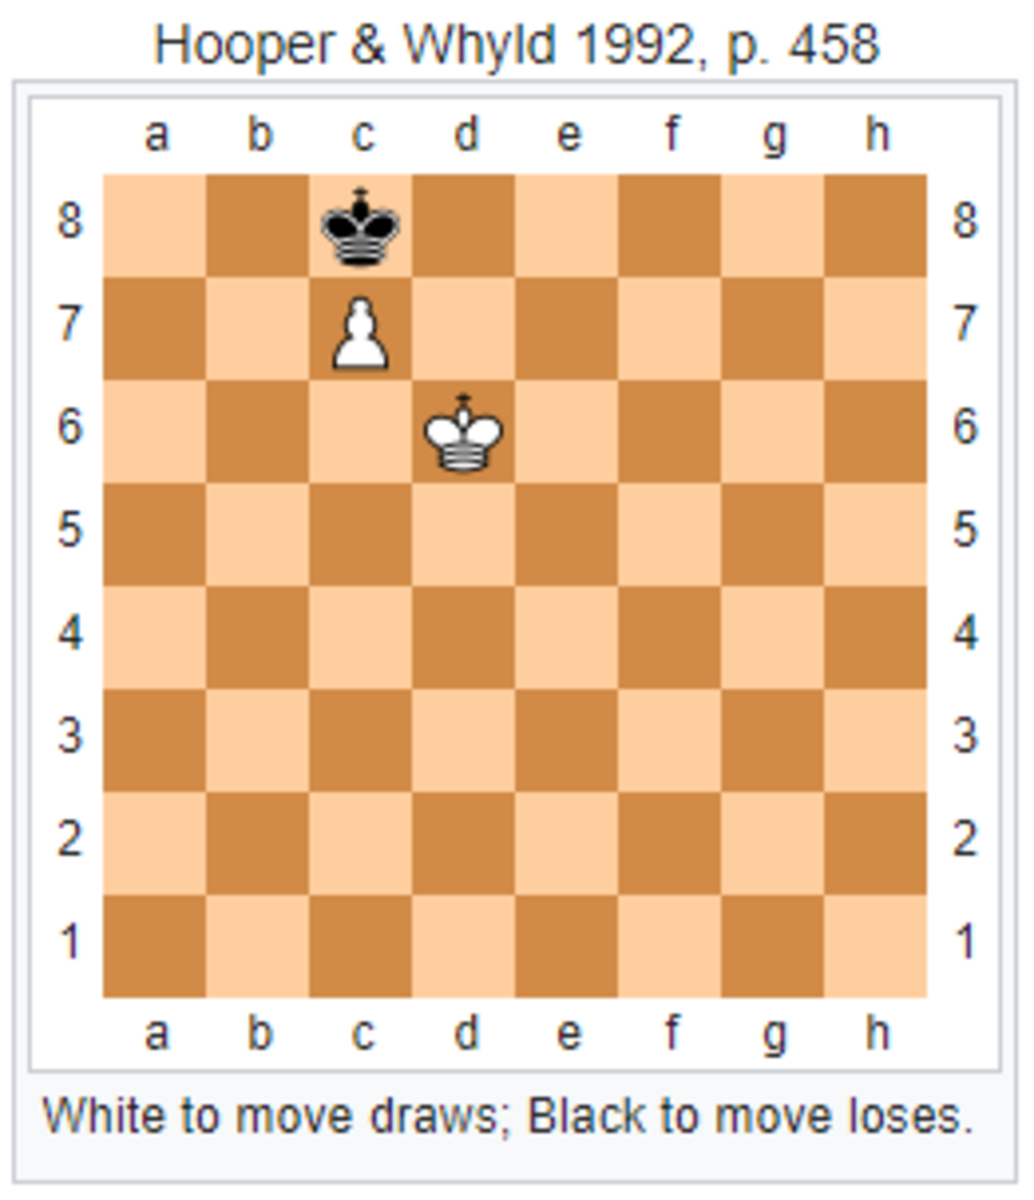 This board position demonstrates zugzwang.